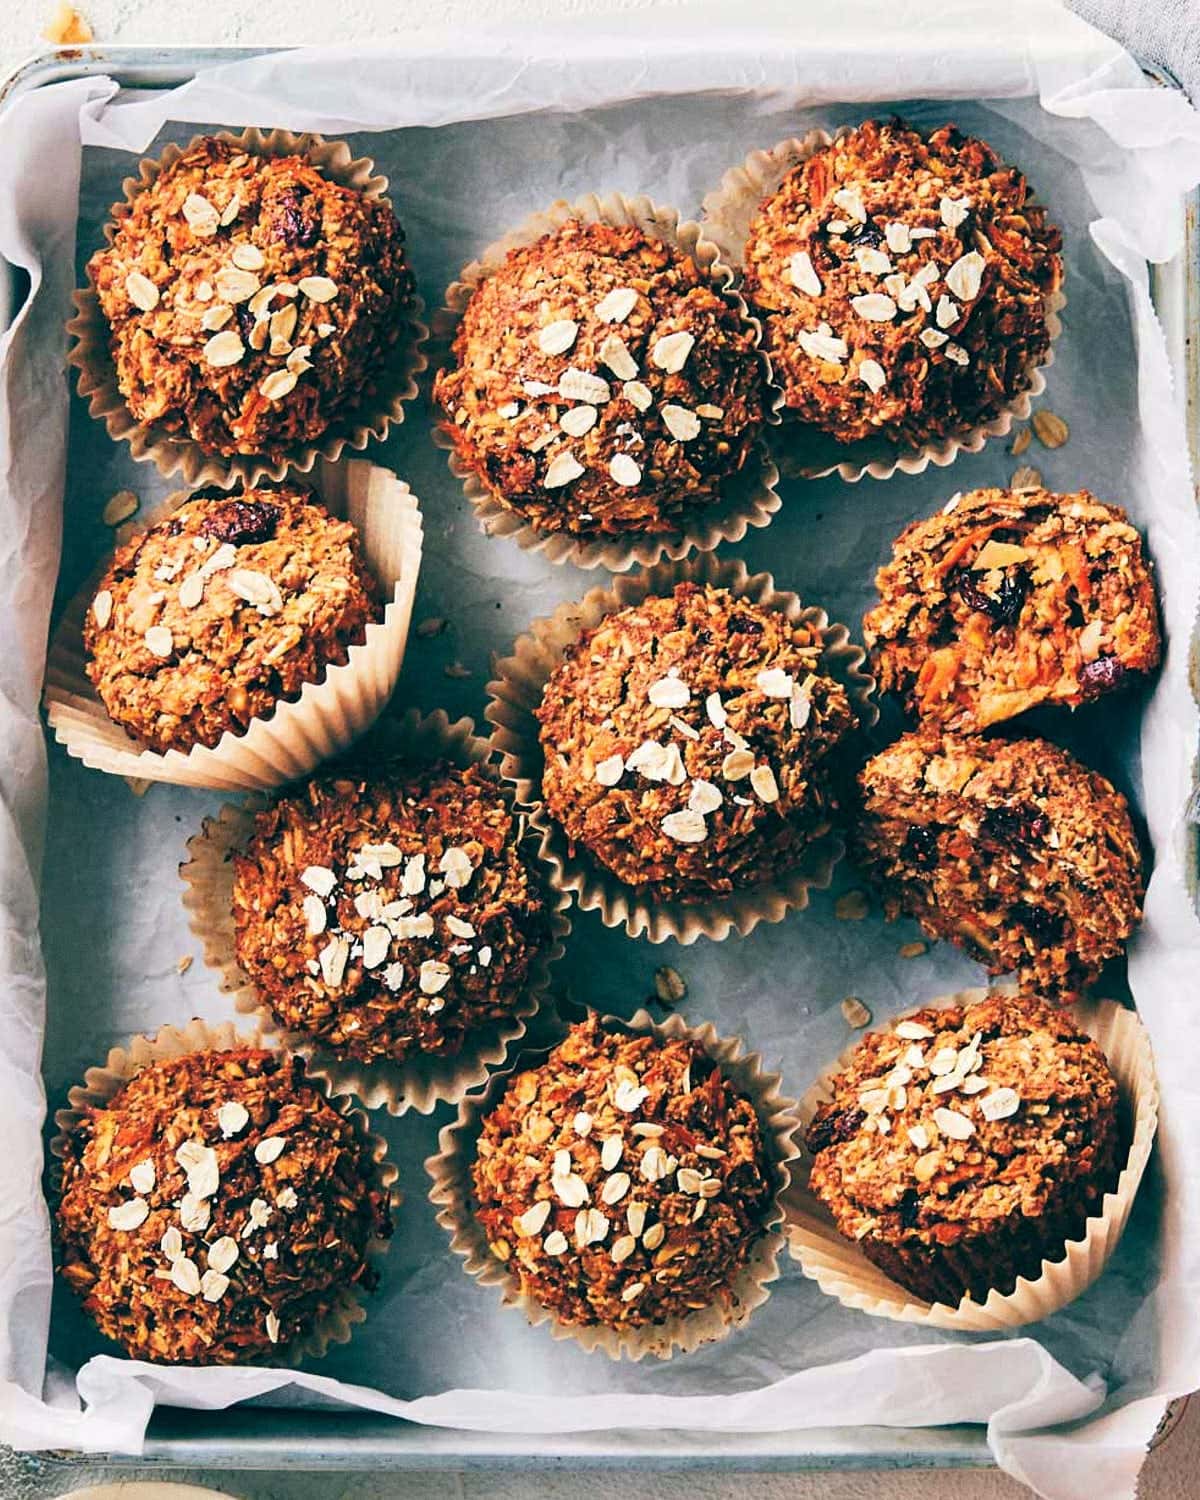 Bunch of breakfast muffins are with oats, apples, carrots and cranberries on a baking pan.